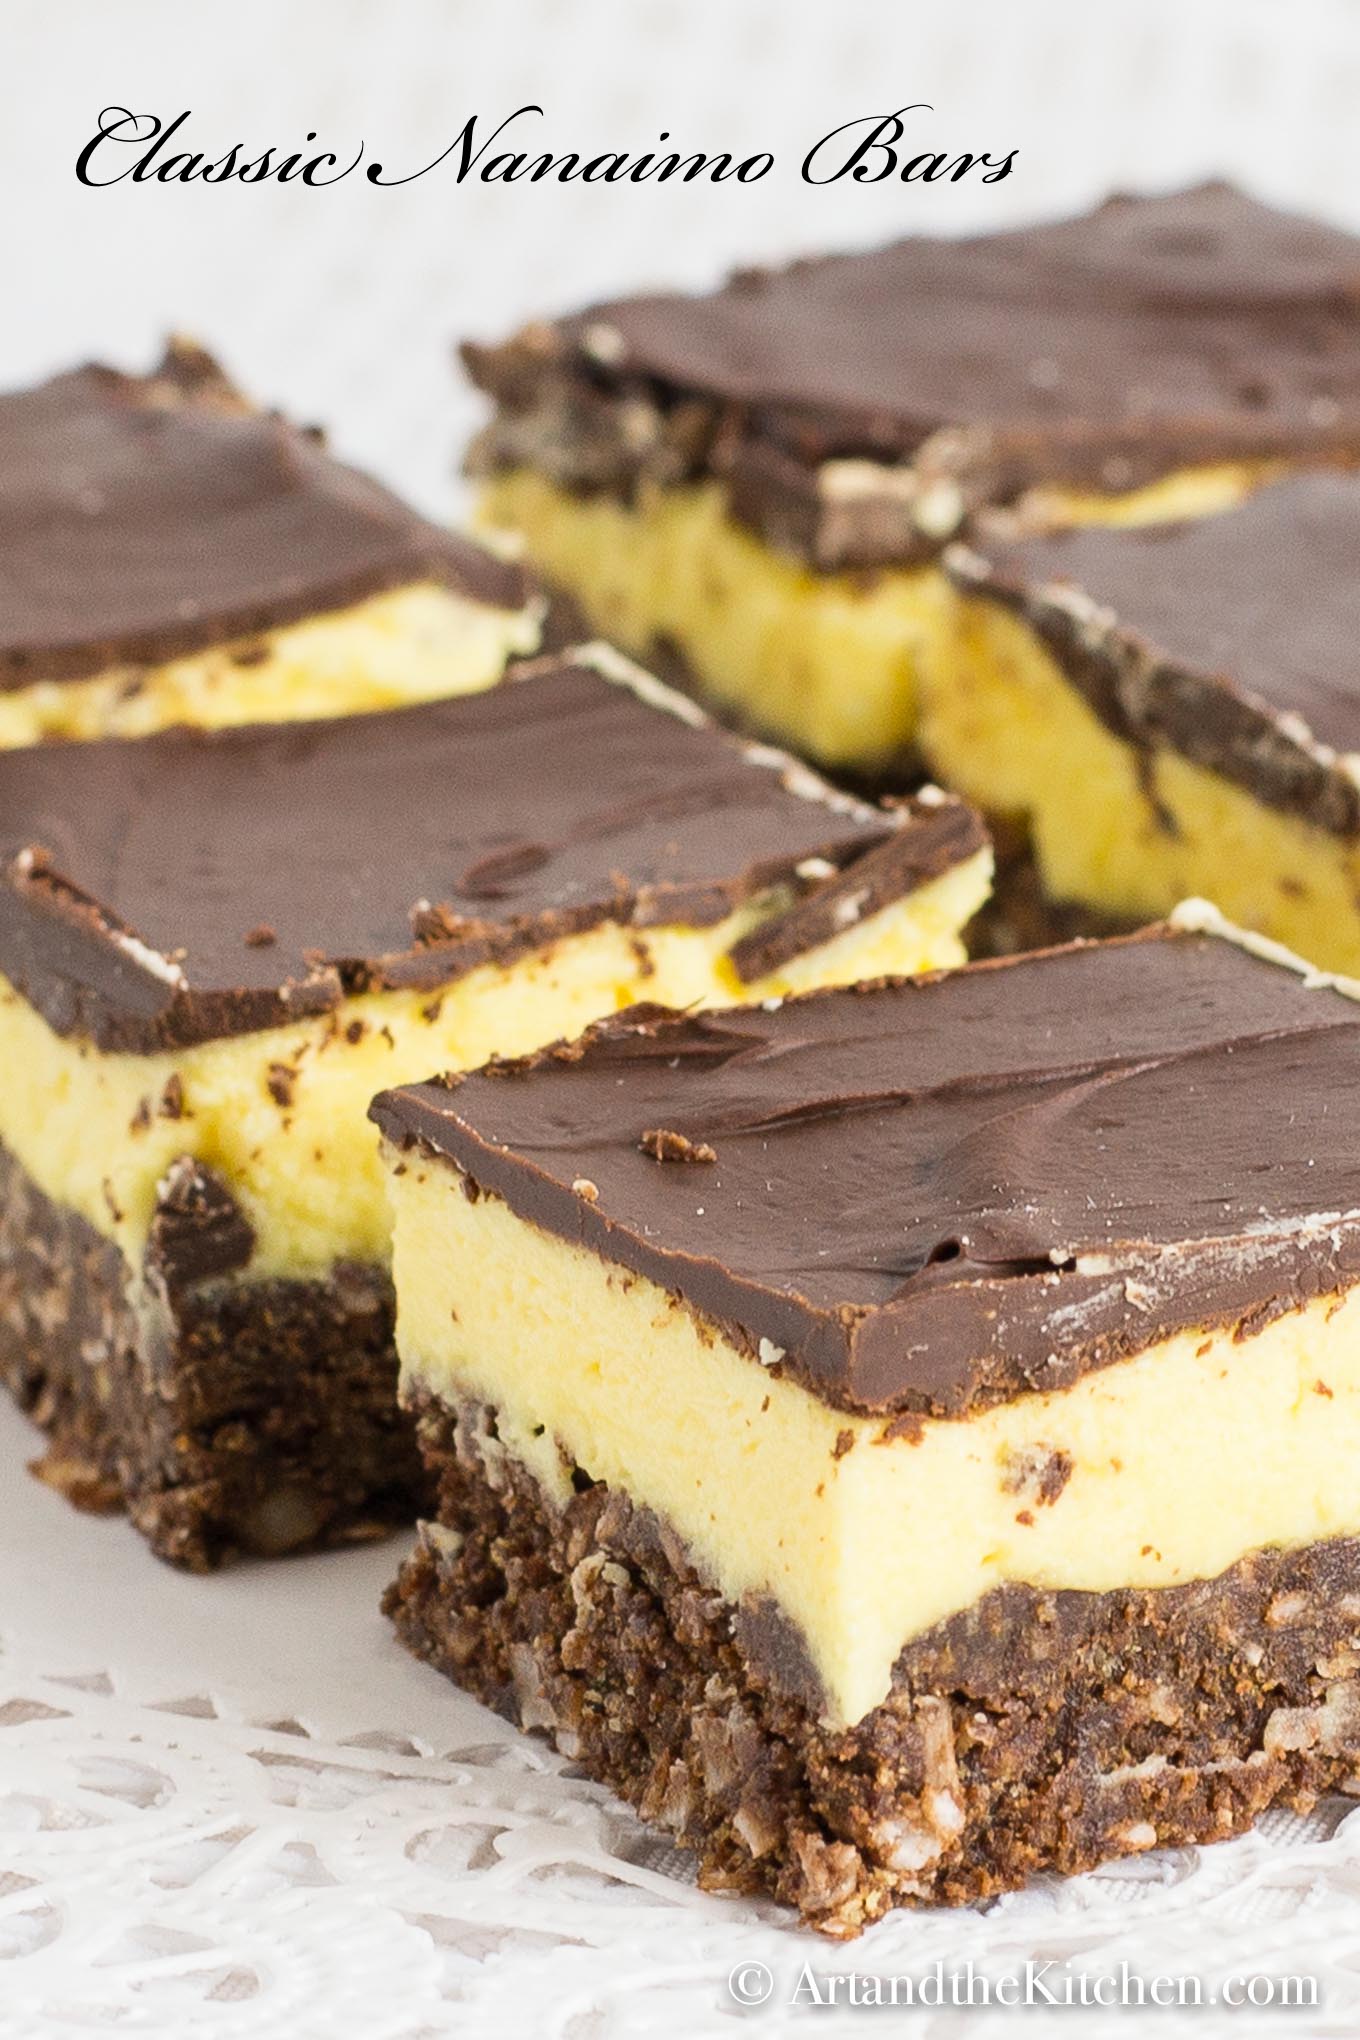 rows of Nanaimo bars on white paper placemat.